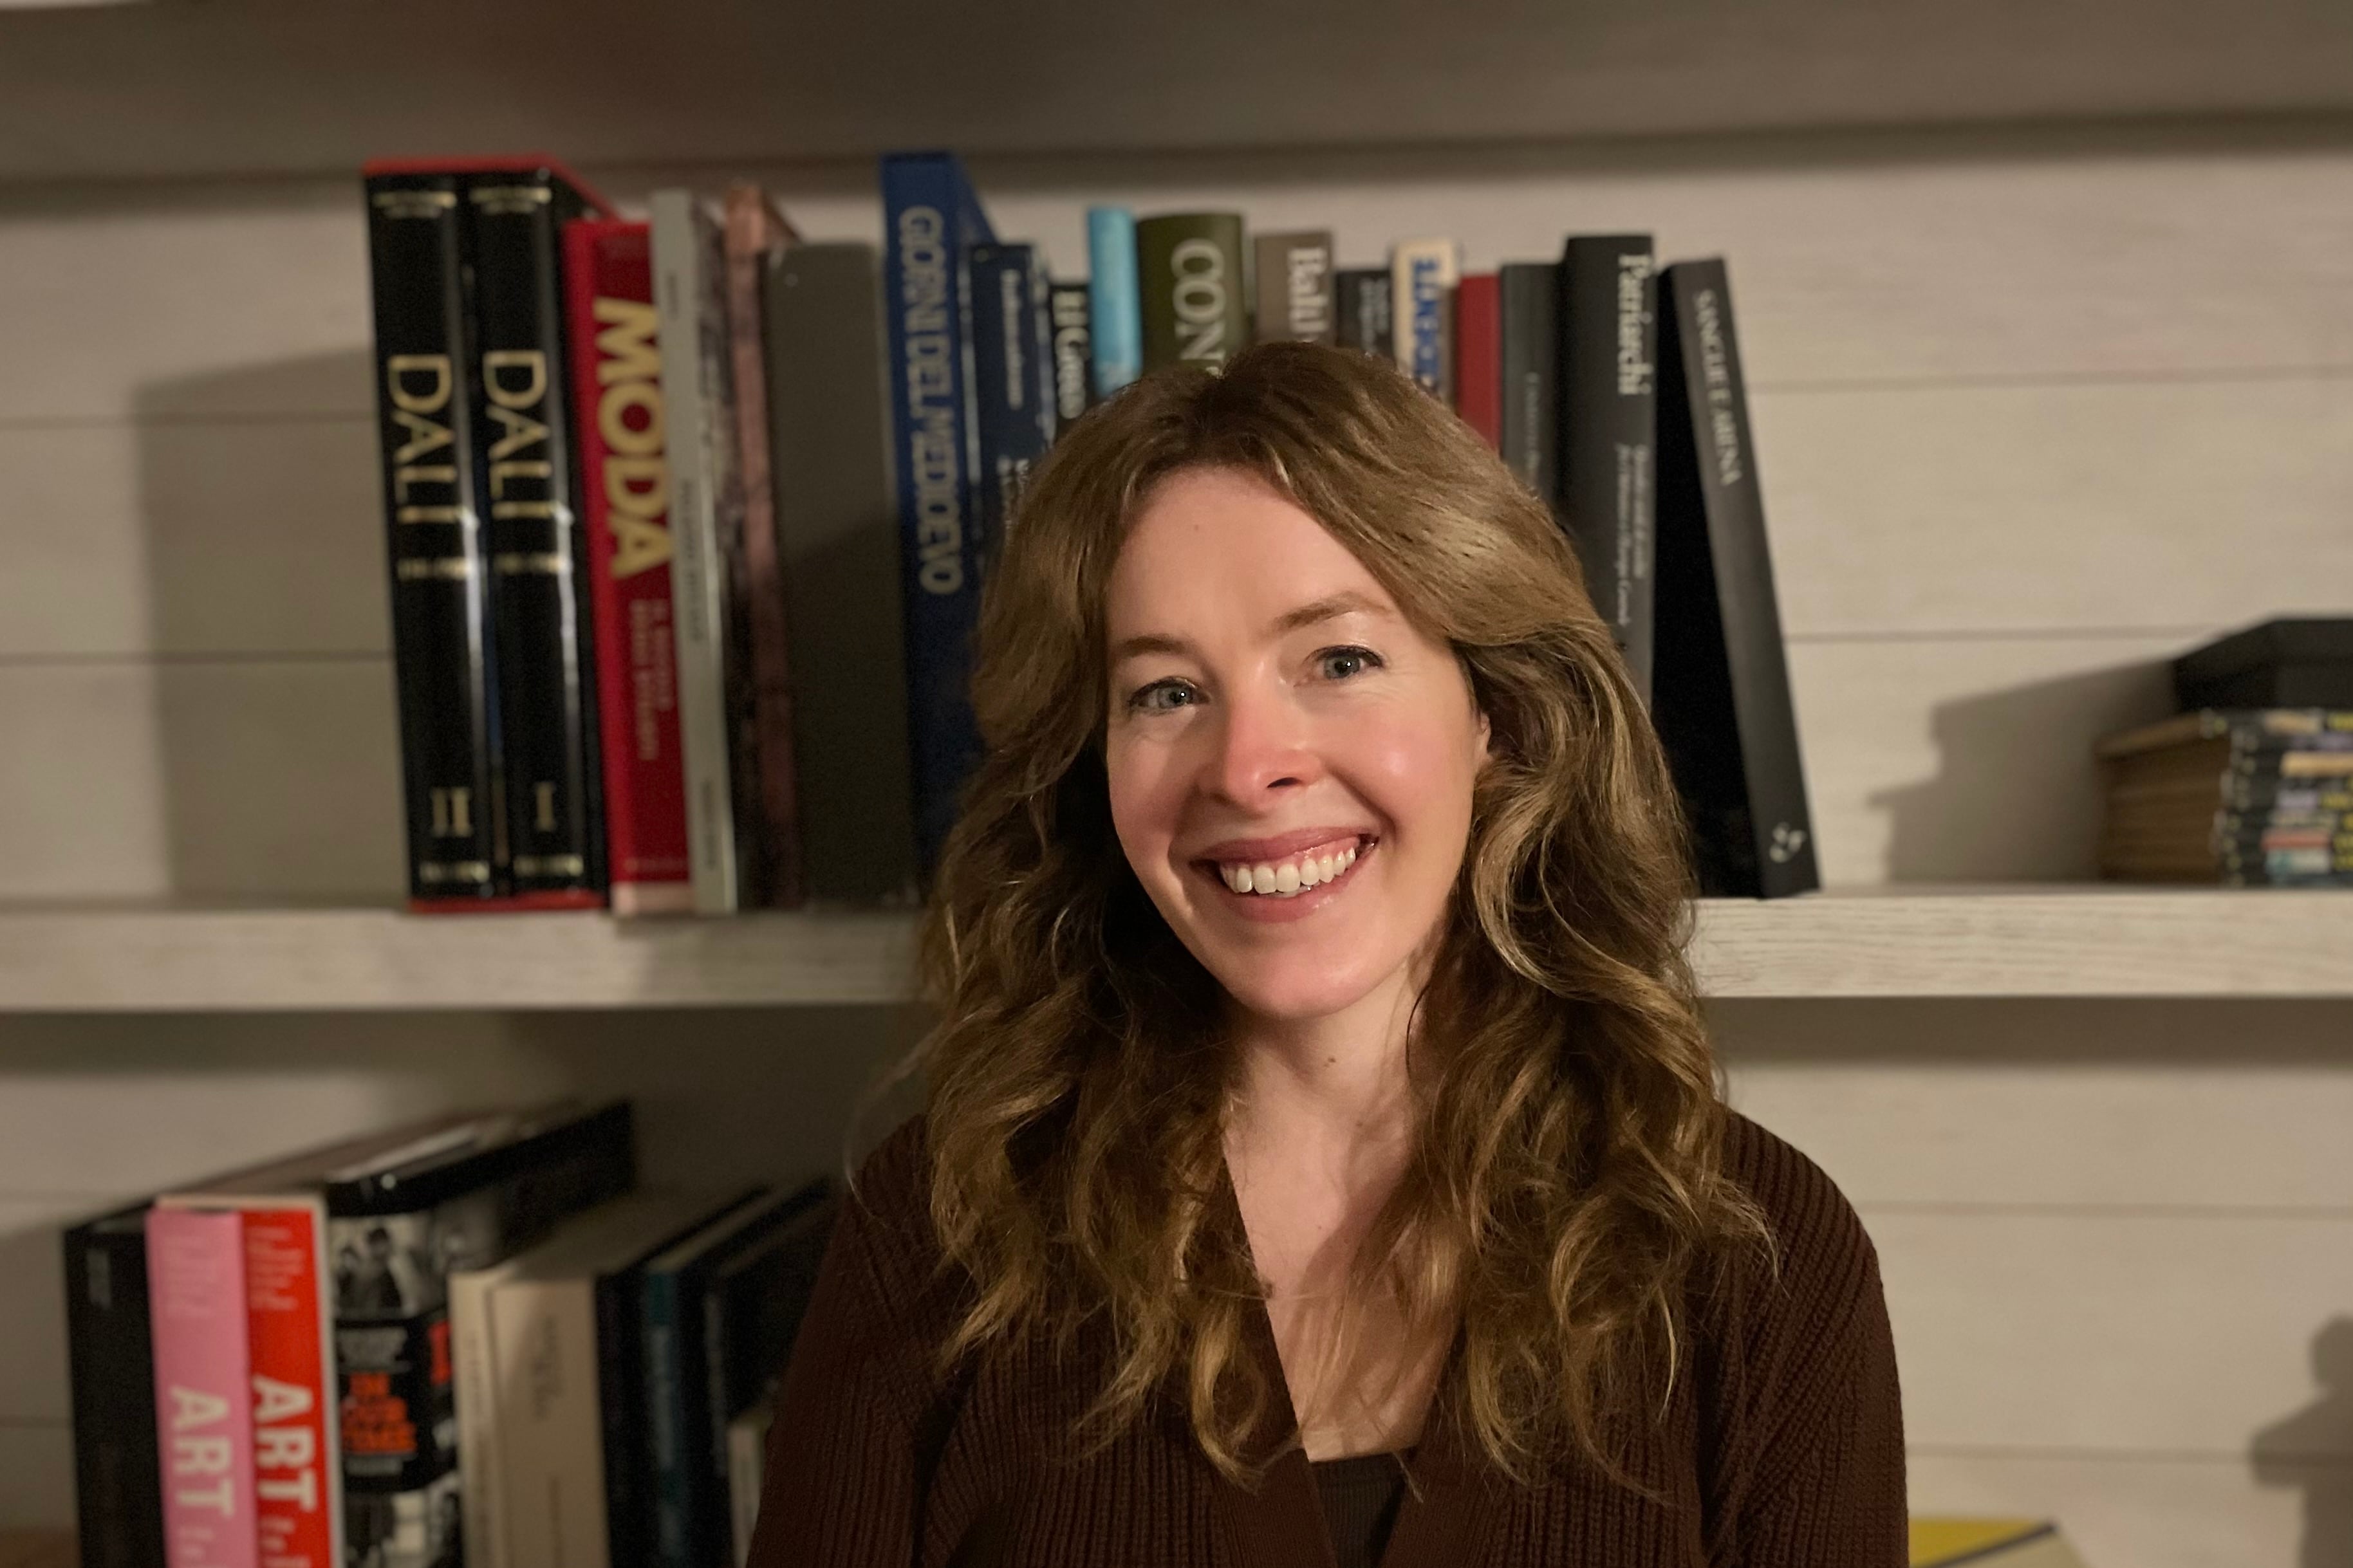 A woman wearing a dark sweater stands smiling in front of bookshelves.